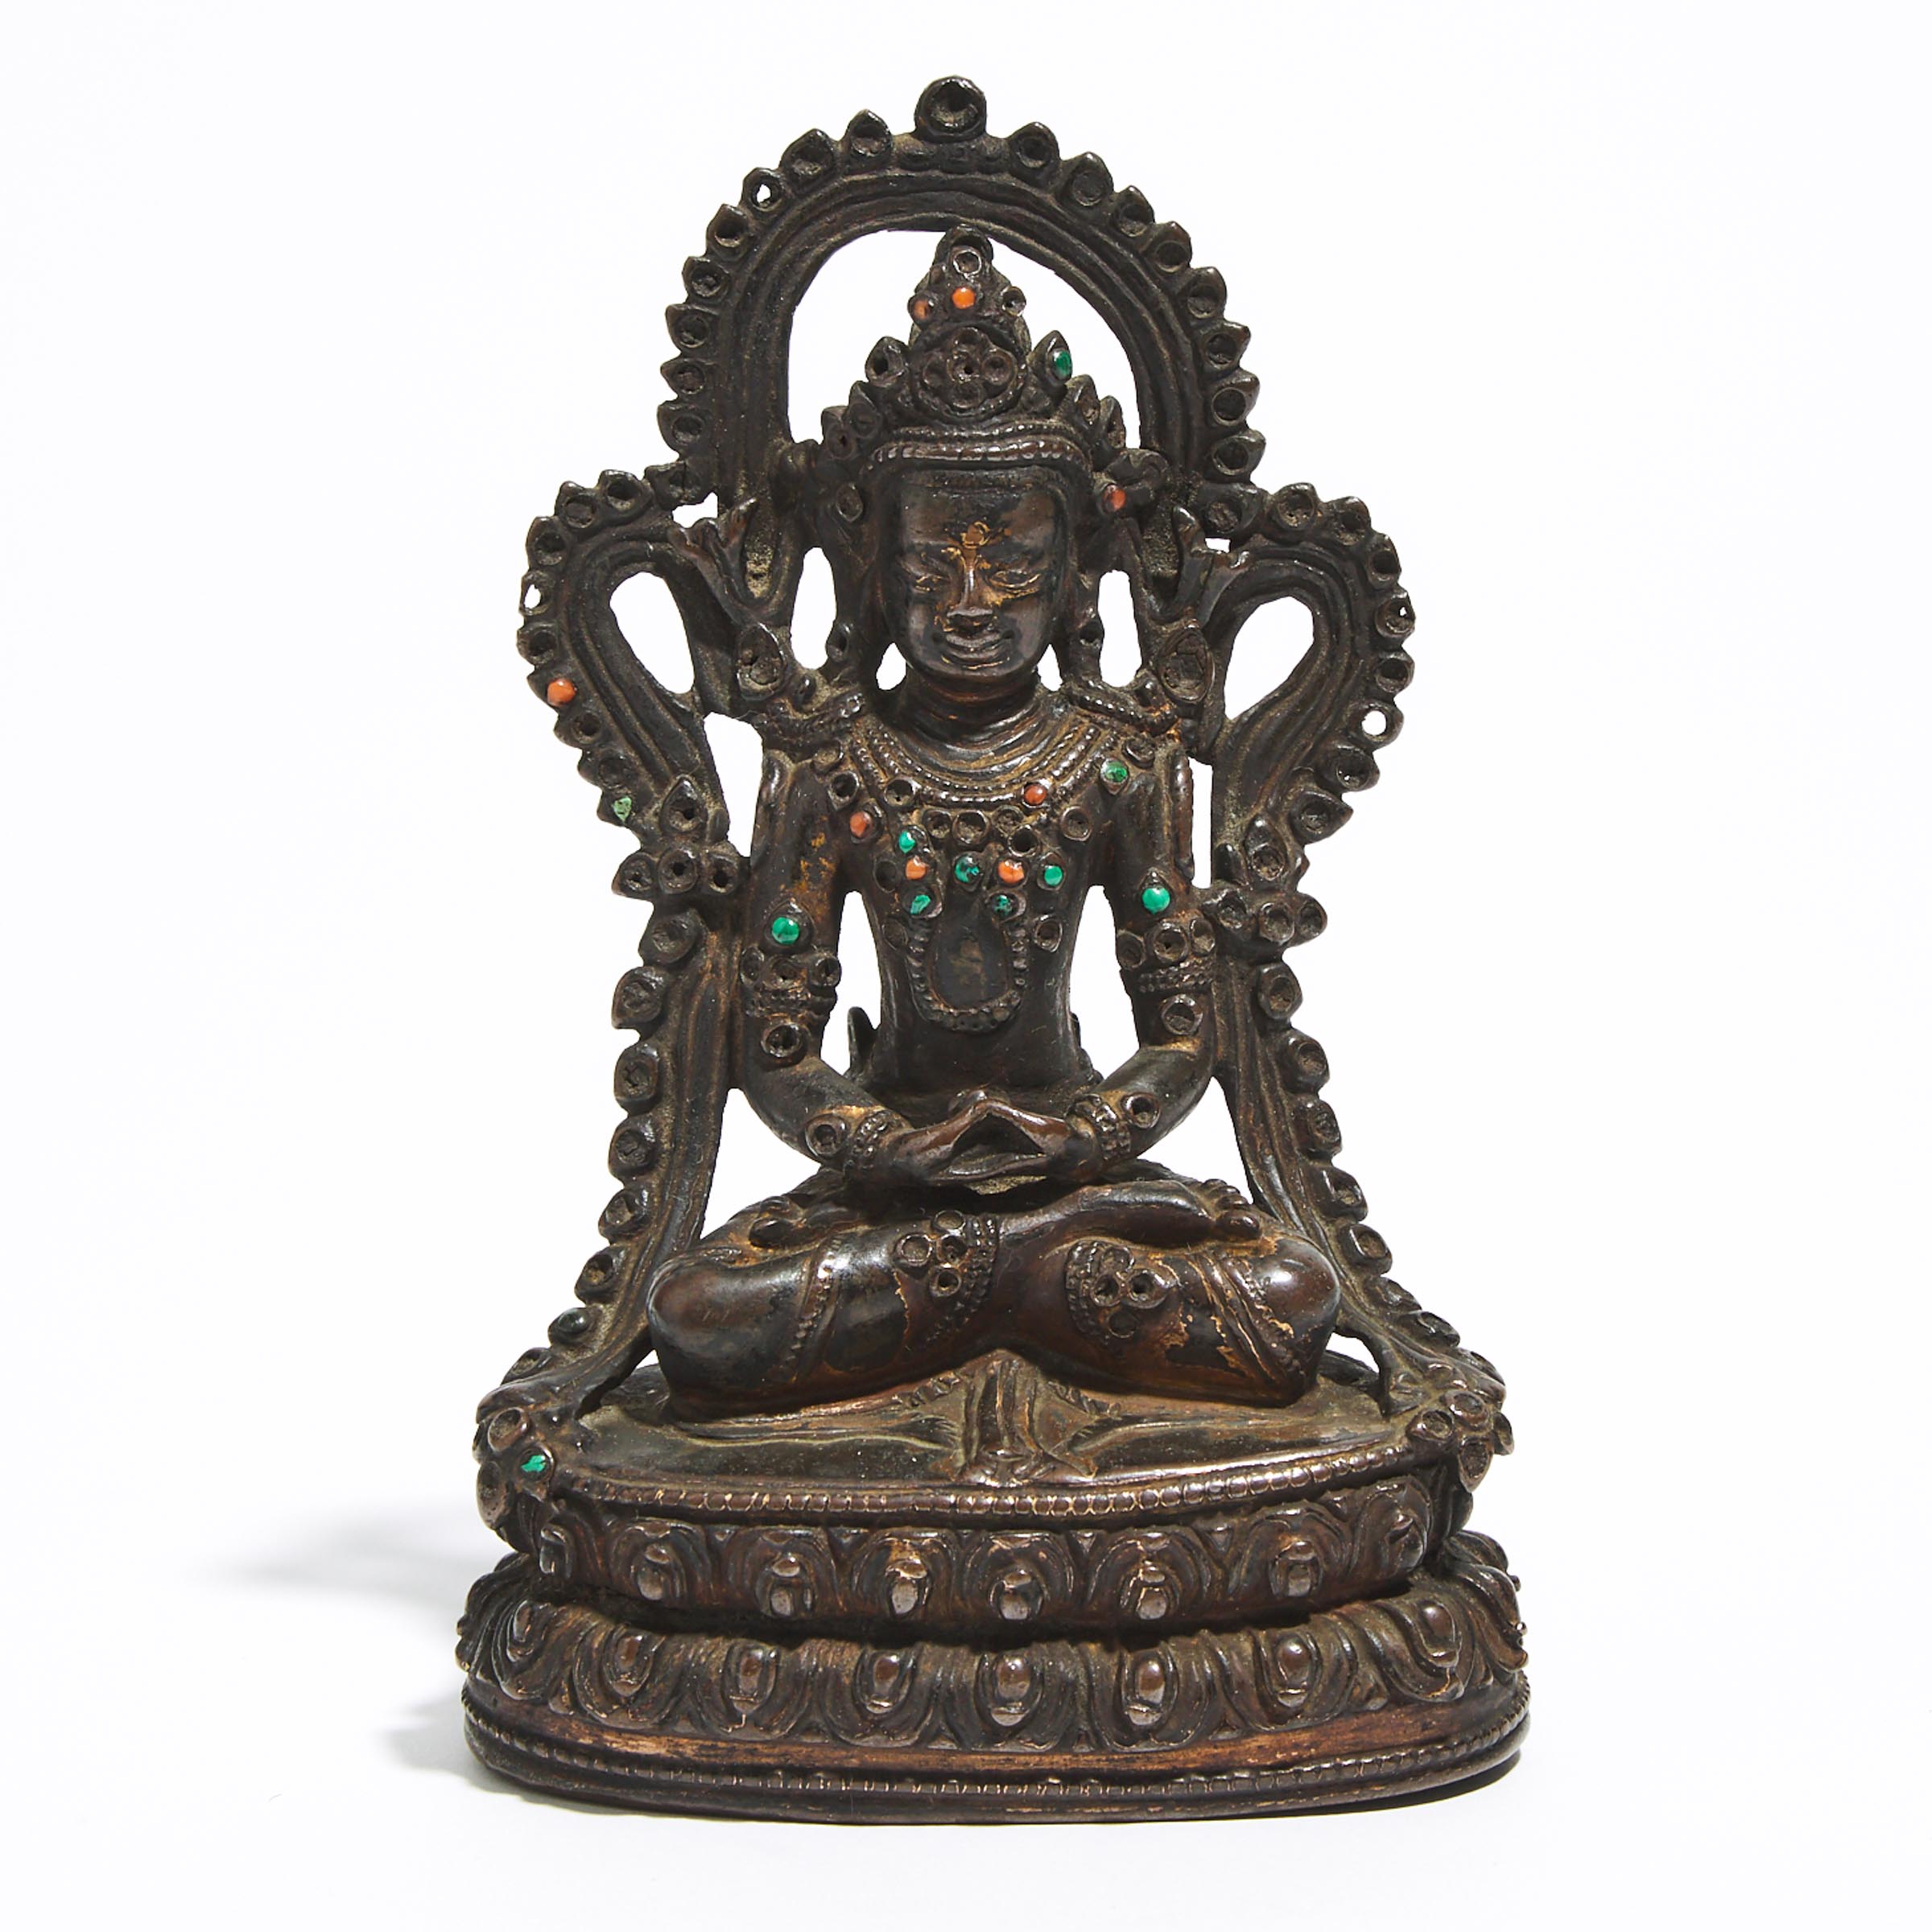 A Copper Alloy Figure of Medicine Buddha, Tibet, 14th Century or Later